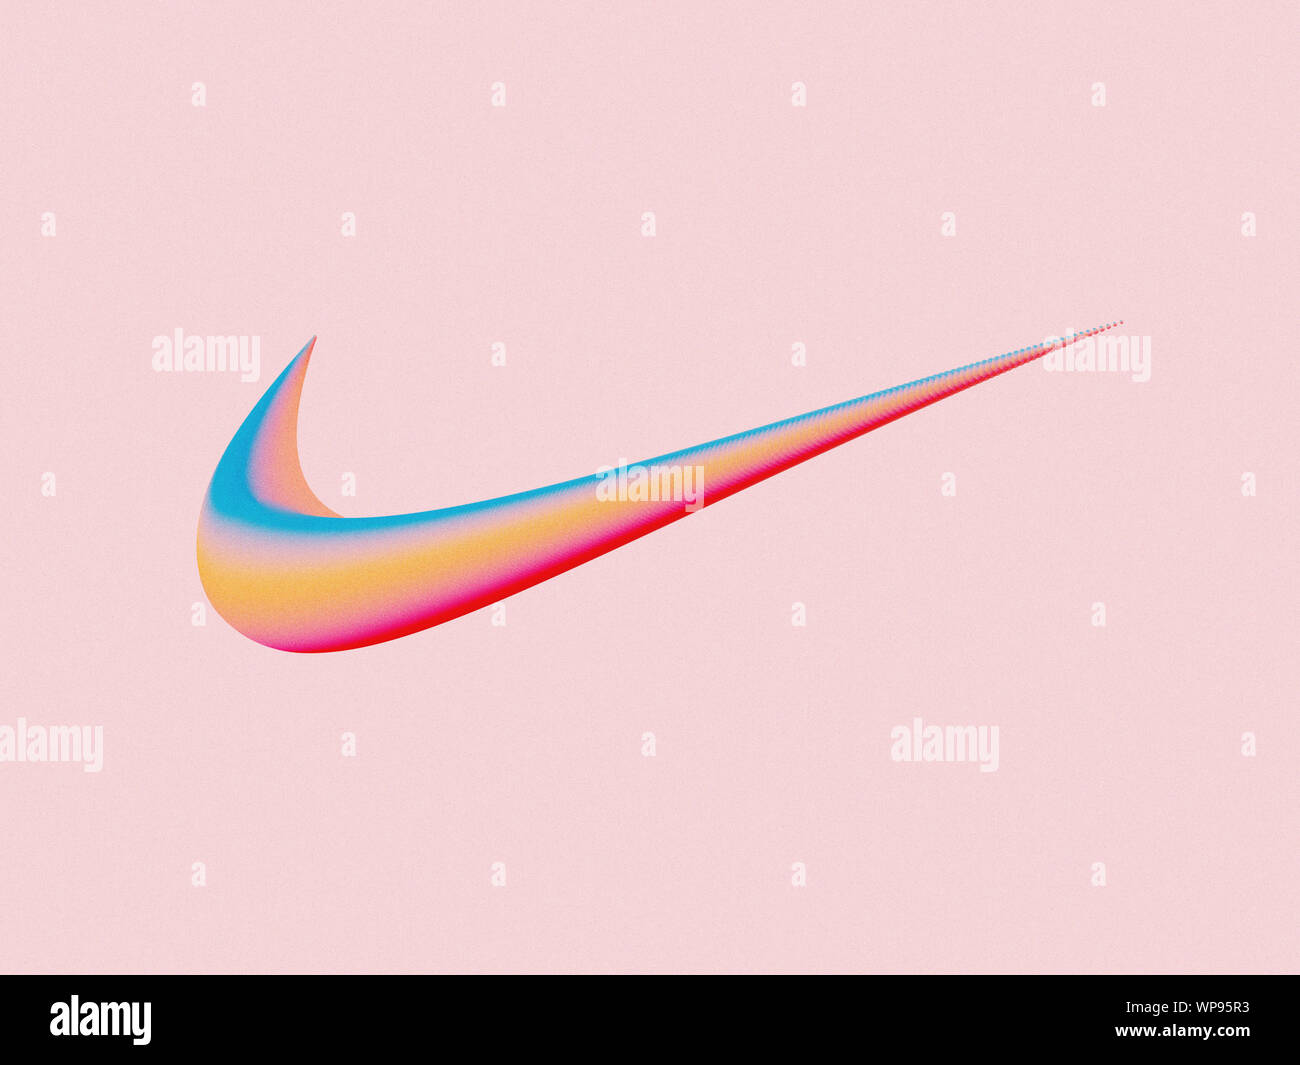 An artistic illustration of the Nike swoosh logo that made blending technique, and placed on a pink Stock Photo - Alamy